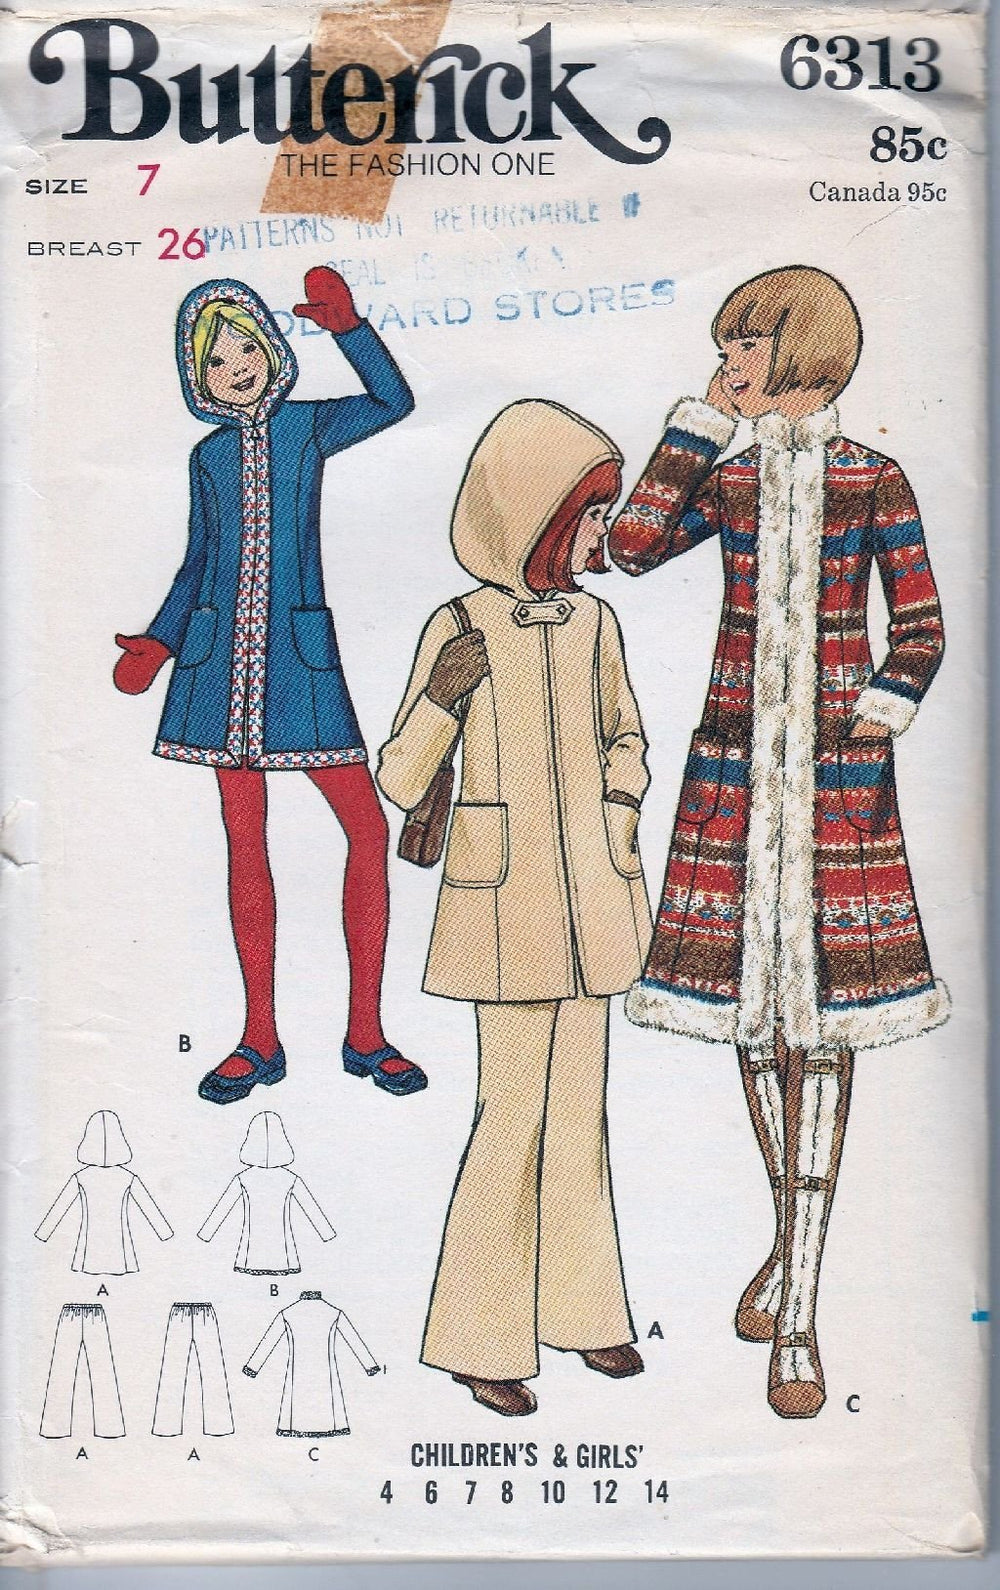 Butterick 6313 Vintage 1970's Sewing Pattern Girls Hooded Coat Flared Pants - VintageStitching - Vintage Sewing Patterns